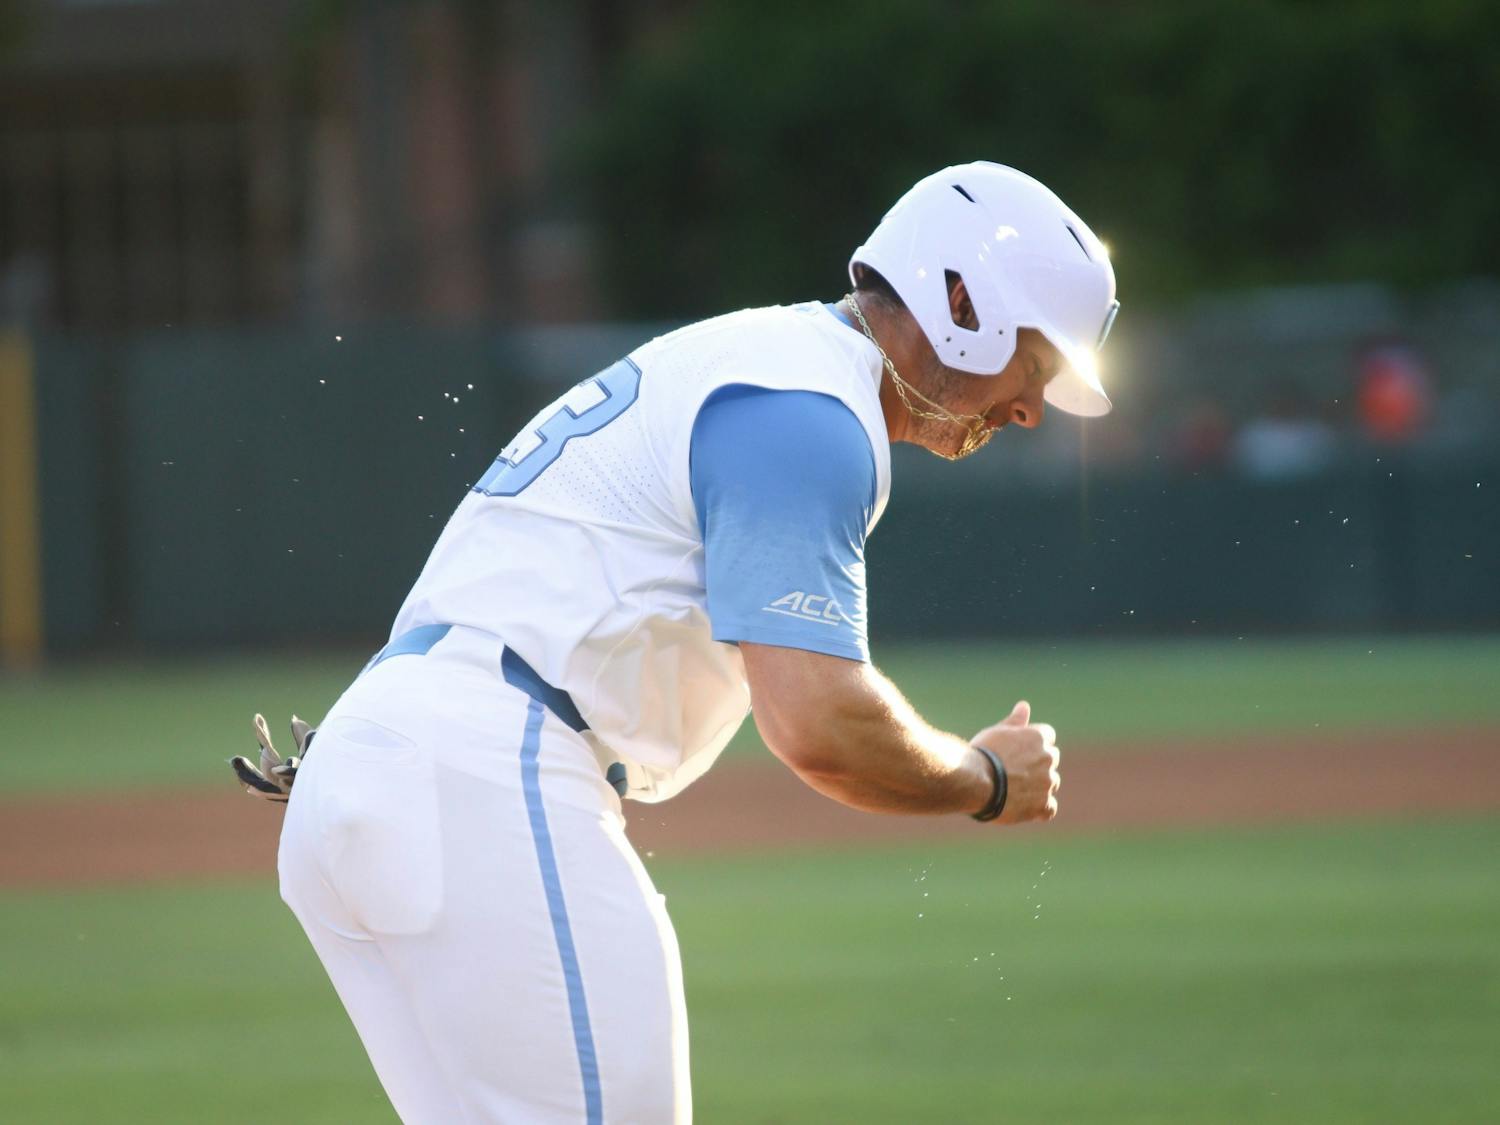 Sophomore designated hitter Alberto Osuna (23) runs towards home base. UNC won 10-4 against FSU at home in the second game of the three-game series on Friday, May 20, 2022.